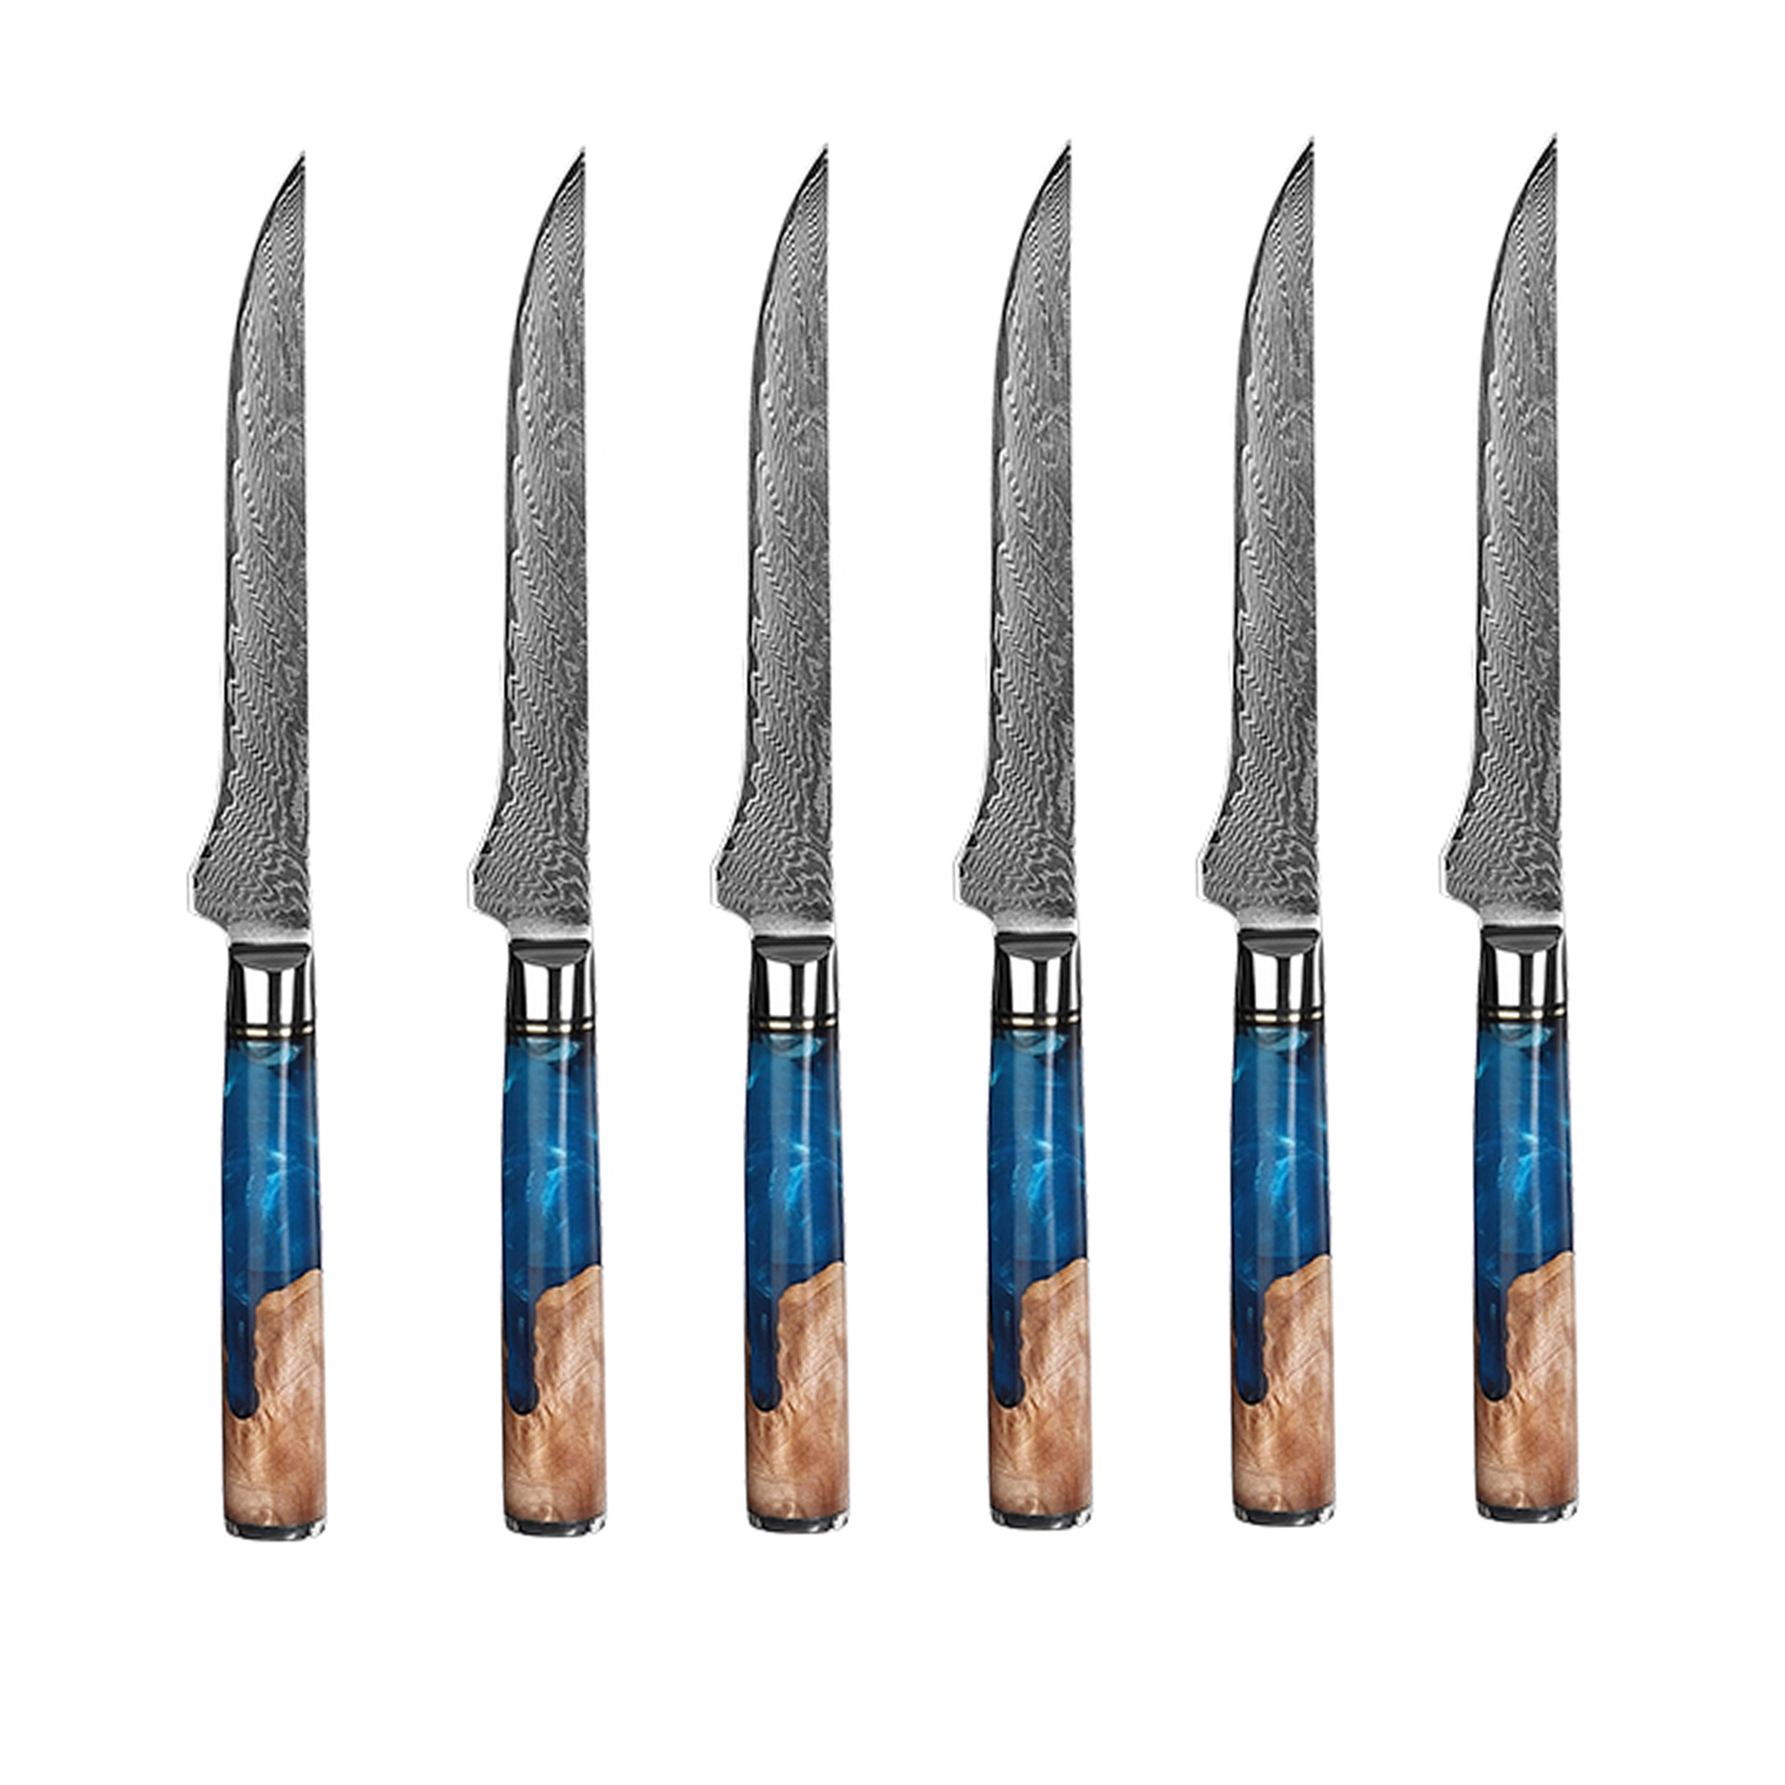 Resin 6 Piece Damascus Steak Knife Set in Blue & Green displayed, showcasing its exquisite Resin Wooden Handles in captivating blue and green colors.